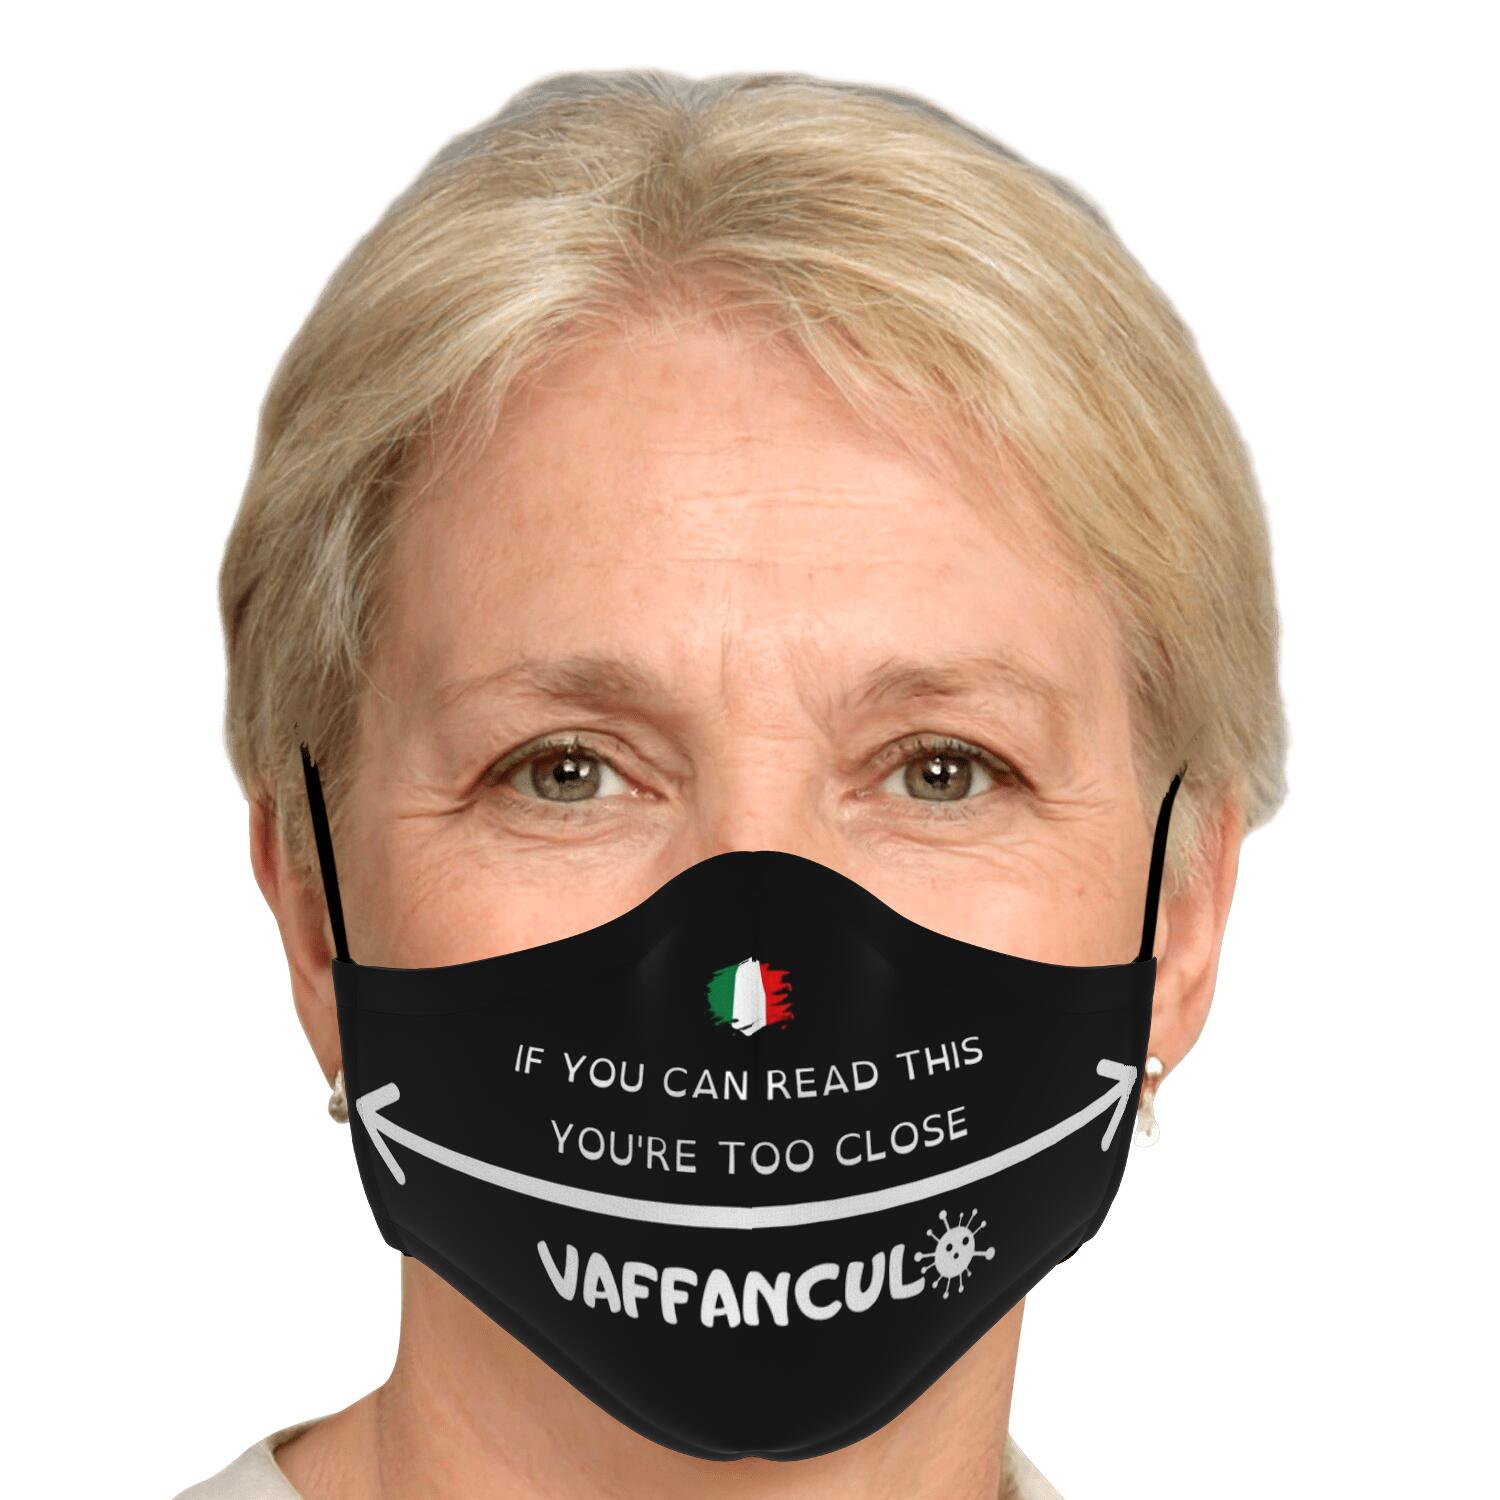 Vaffanculo Virus You're Too Close Face Mask + 2 PM 2.5 Filters